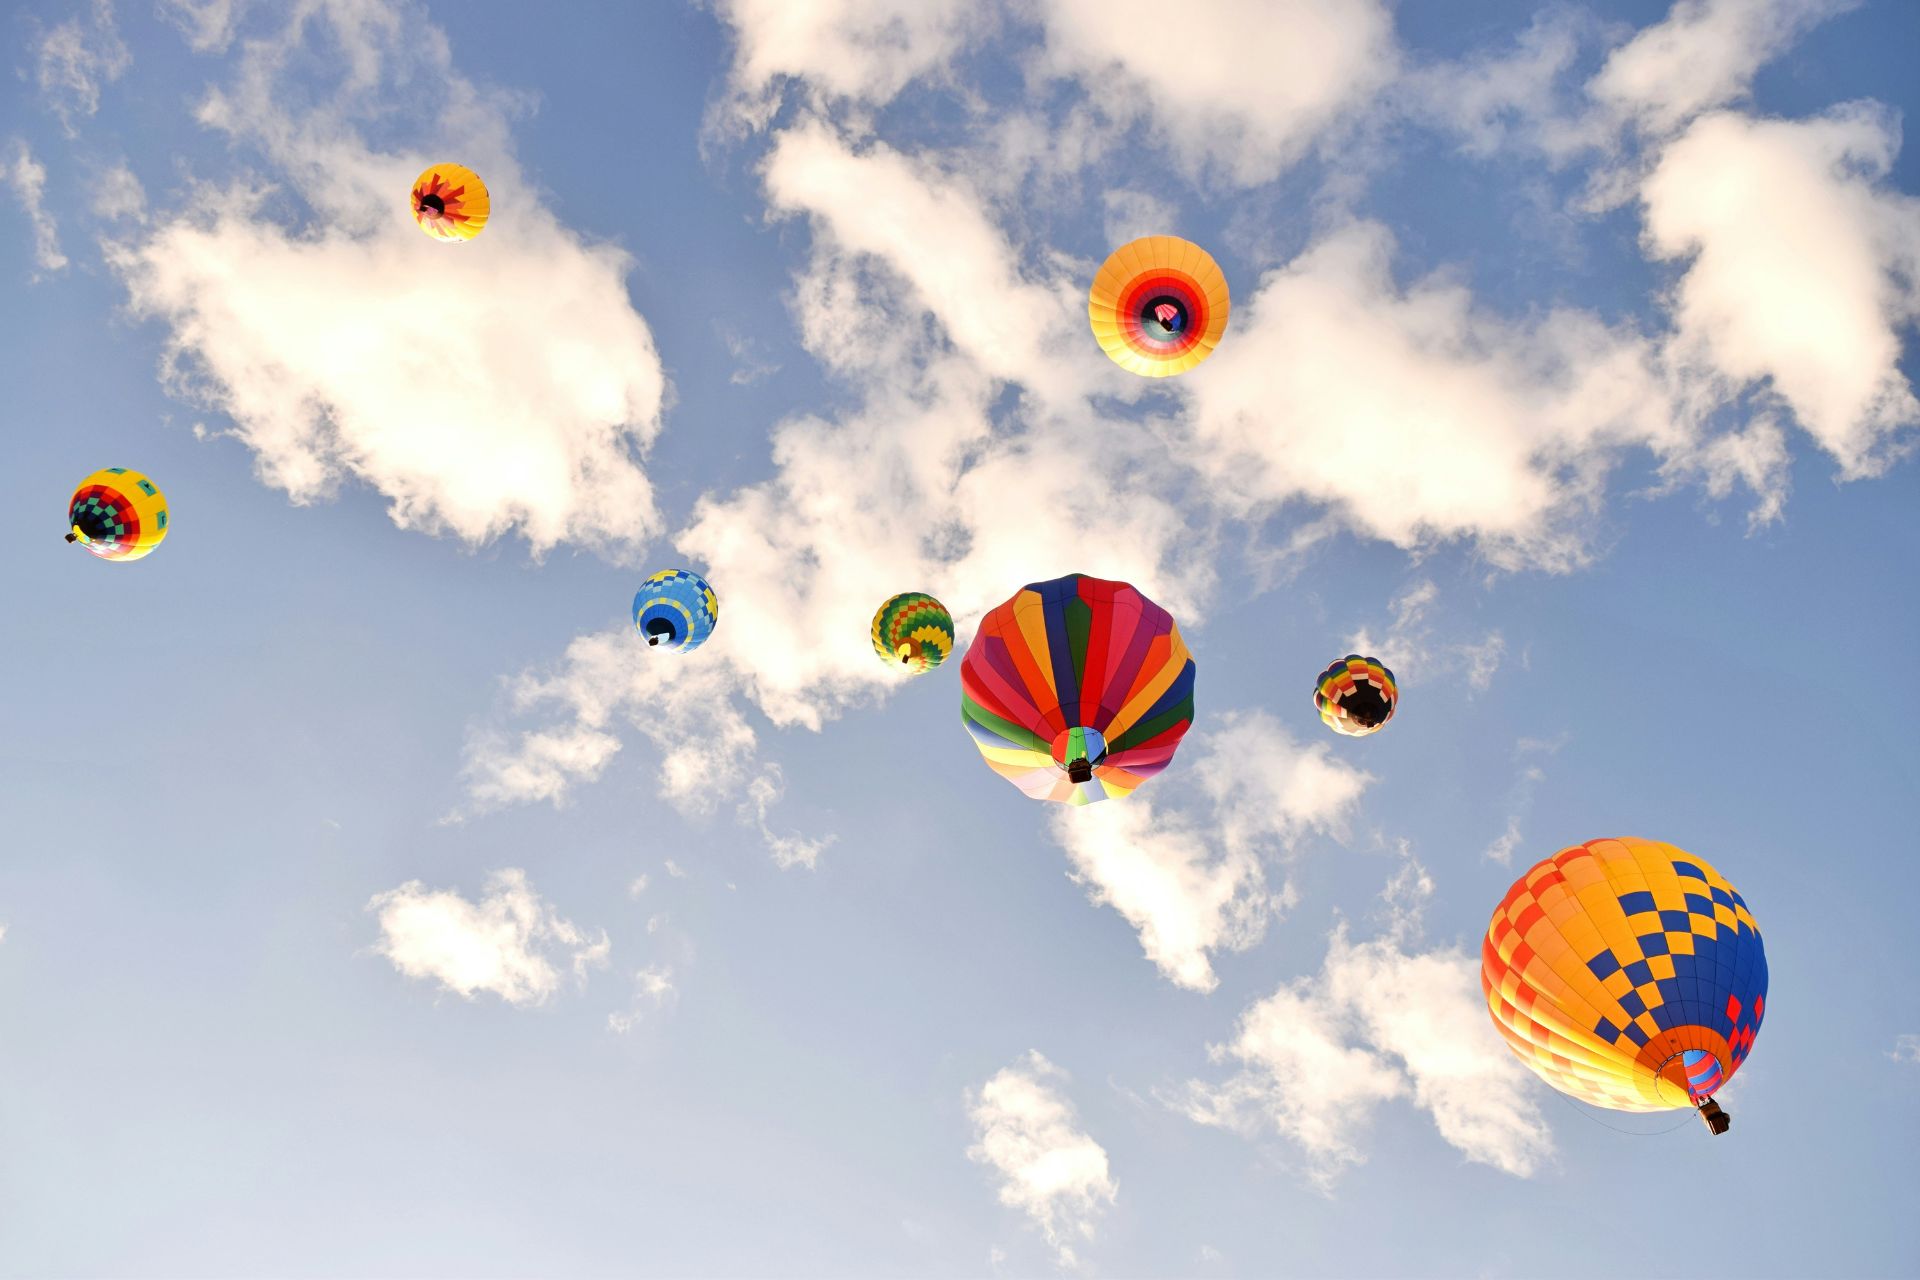 A Hot Air Balloon Festival Is Coming To London In July